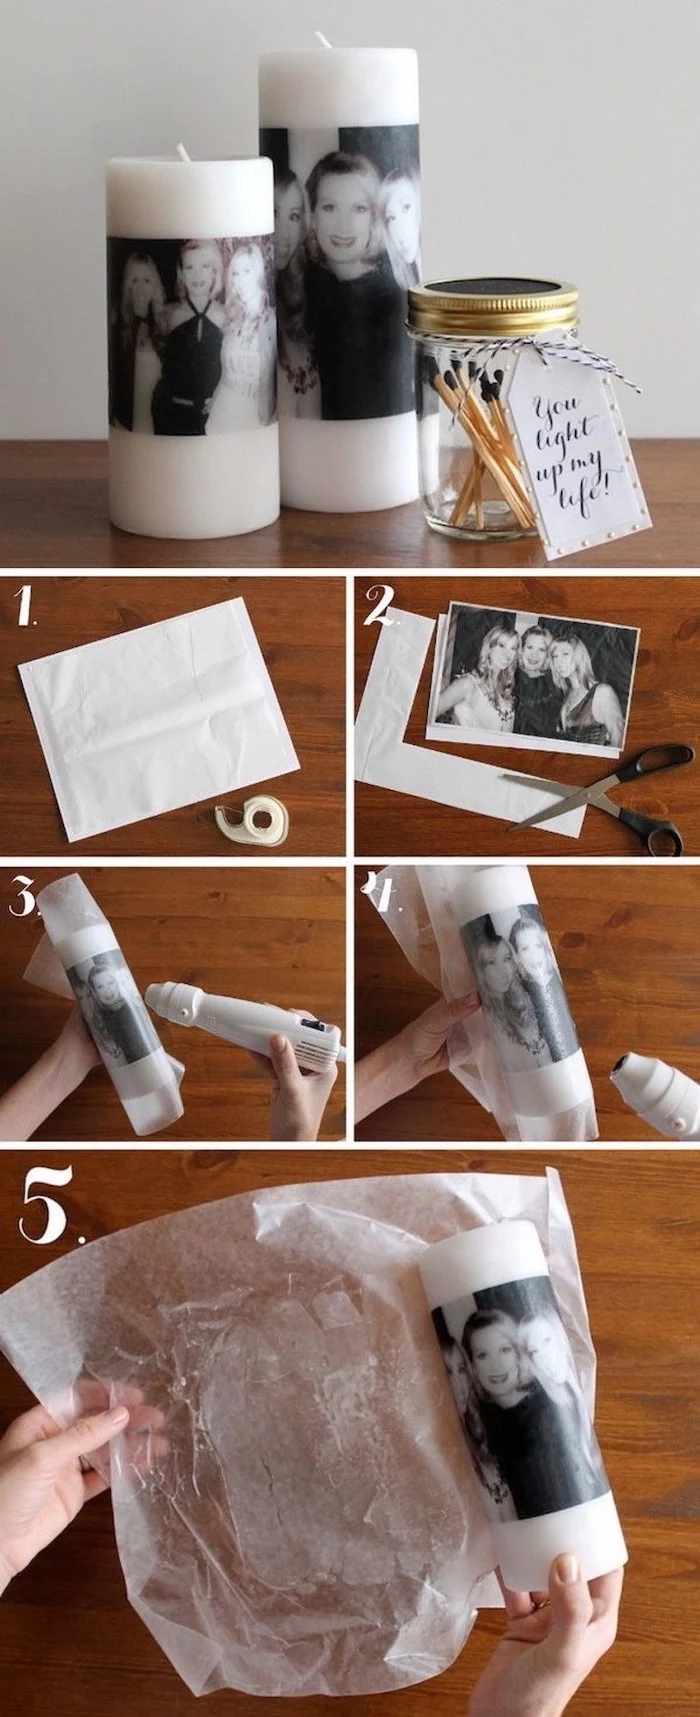 photo collage with step by step diy tutorial, how to print photos on candles, personalised gifts for mom